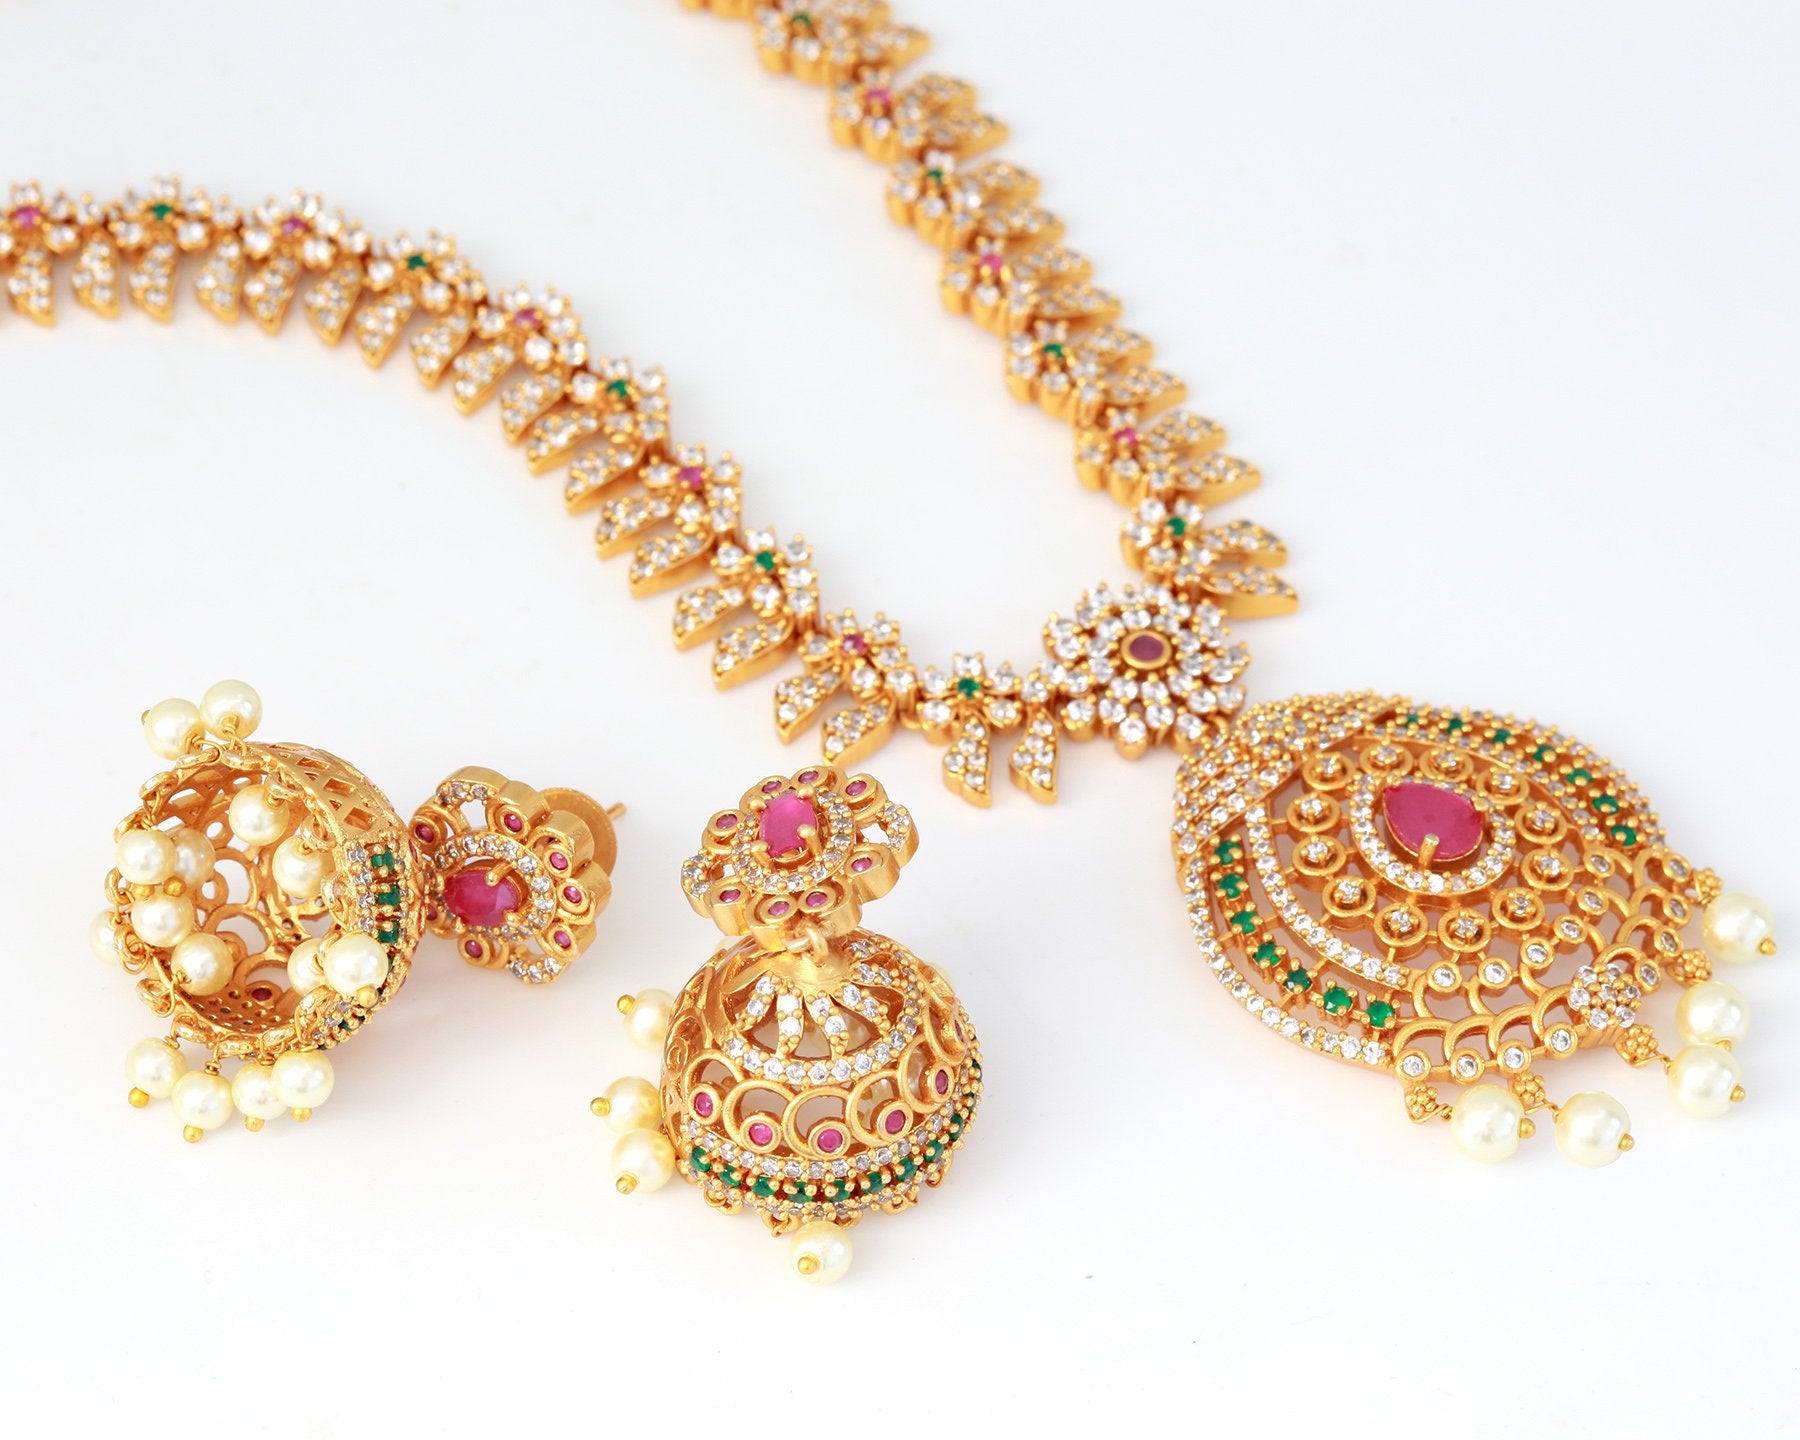 22K Indian Necklaces - Find Your New Favorite Piece | Virani Jewelers